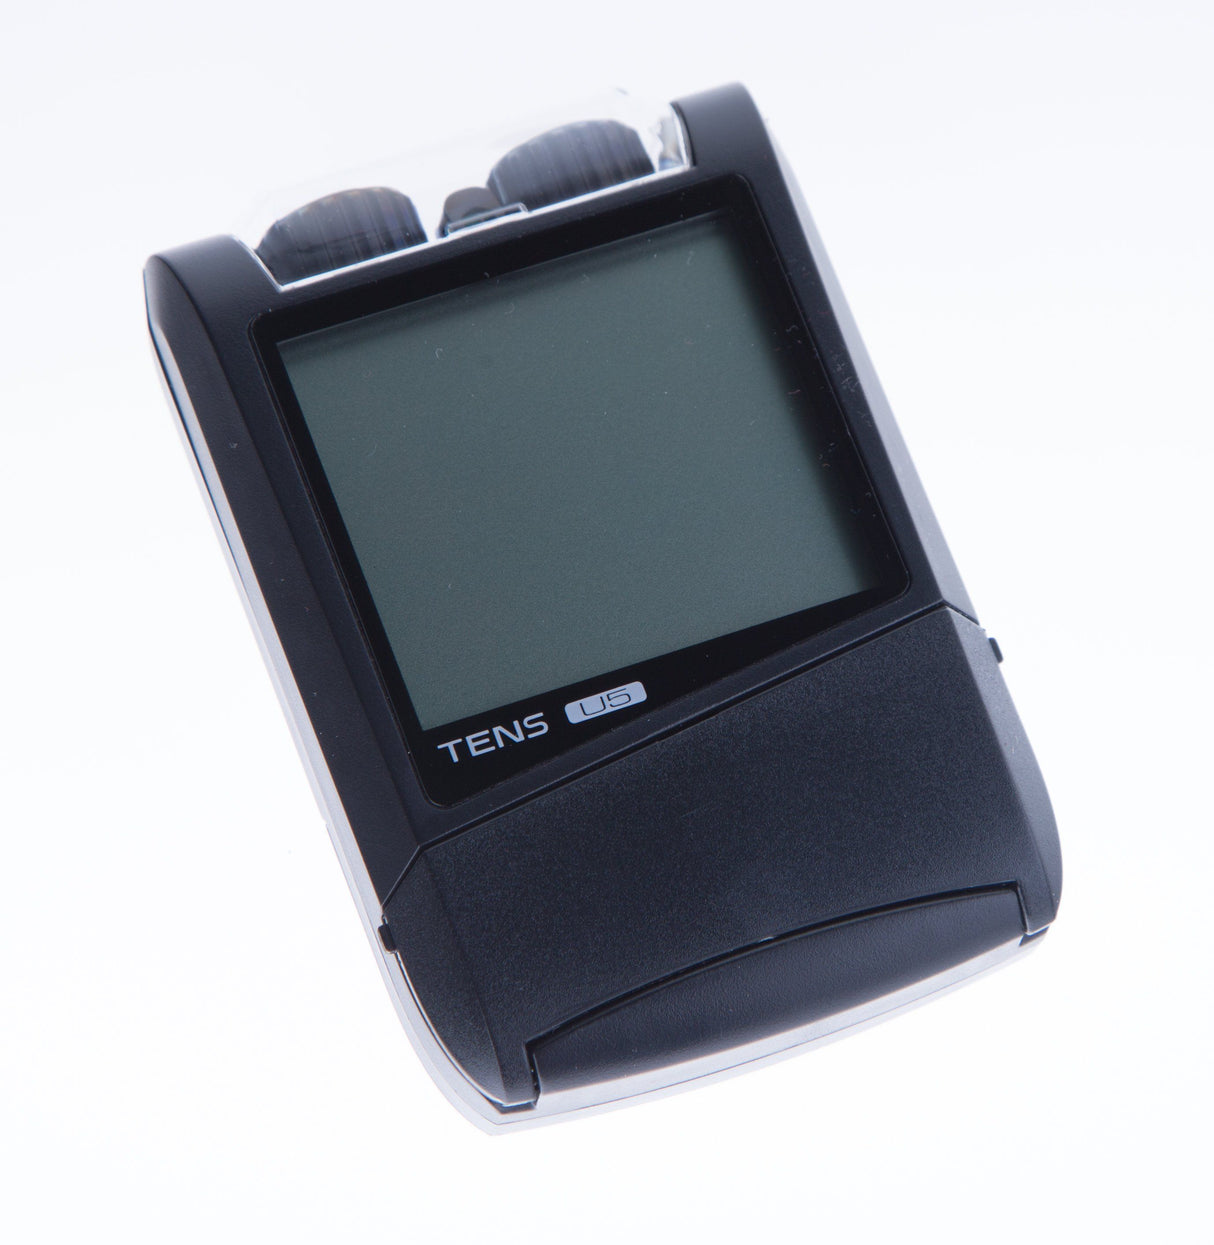 Image of Ultima 5 Digital Tens Unit Dual Channel With Carrying Case